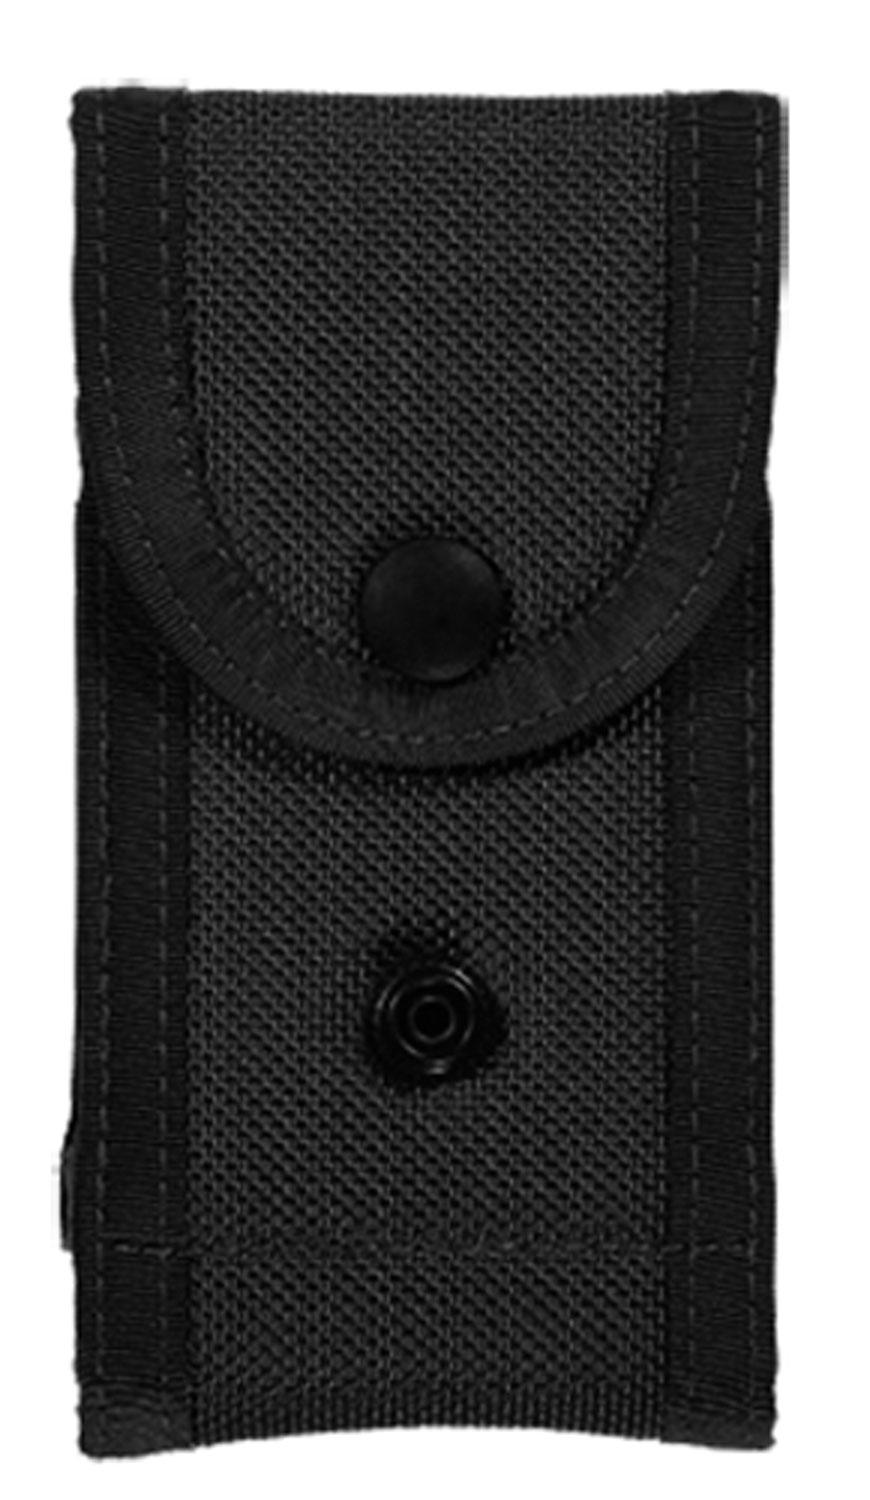  Bia 17645 M1025 Mil Mag Pouch Blk